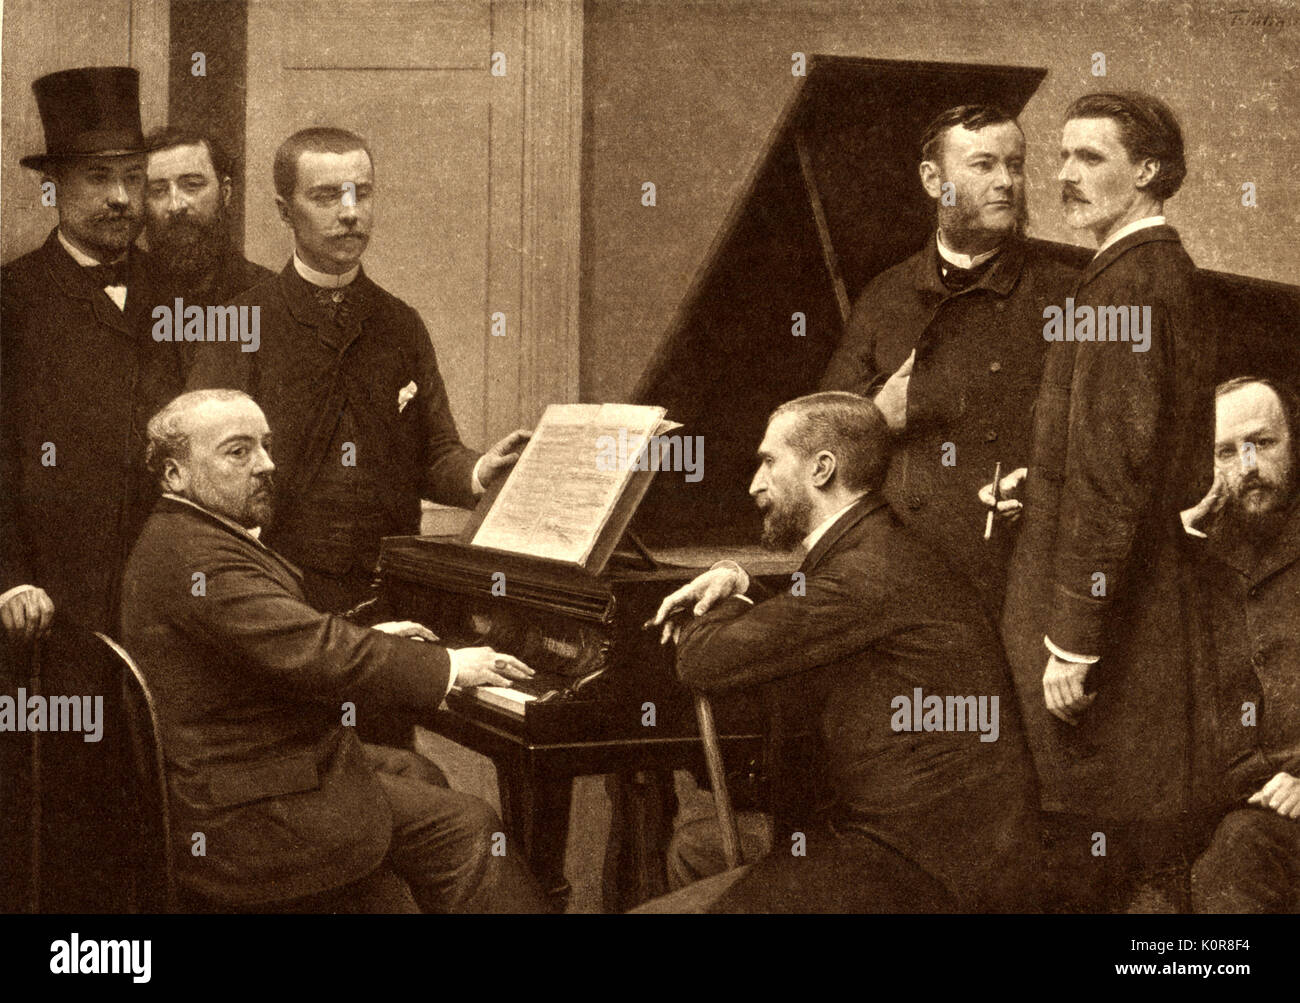 CHABRIER, Emmanuel  at piano 1885 by Fantin-Latour This group was know as 'Les Wagneristes'.  Around him are A.Jullien, A.Boisseau, C.Benoit, on right standing A.Lascoux, Vincent d'Indy(w. cigarette holder), E.Maitre, A.Pigeon.  French composer.  Jullien, French composer, originally Louis Antoine Julien. Stock Photo